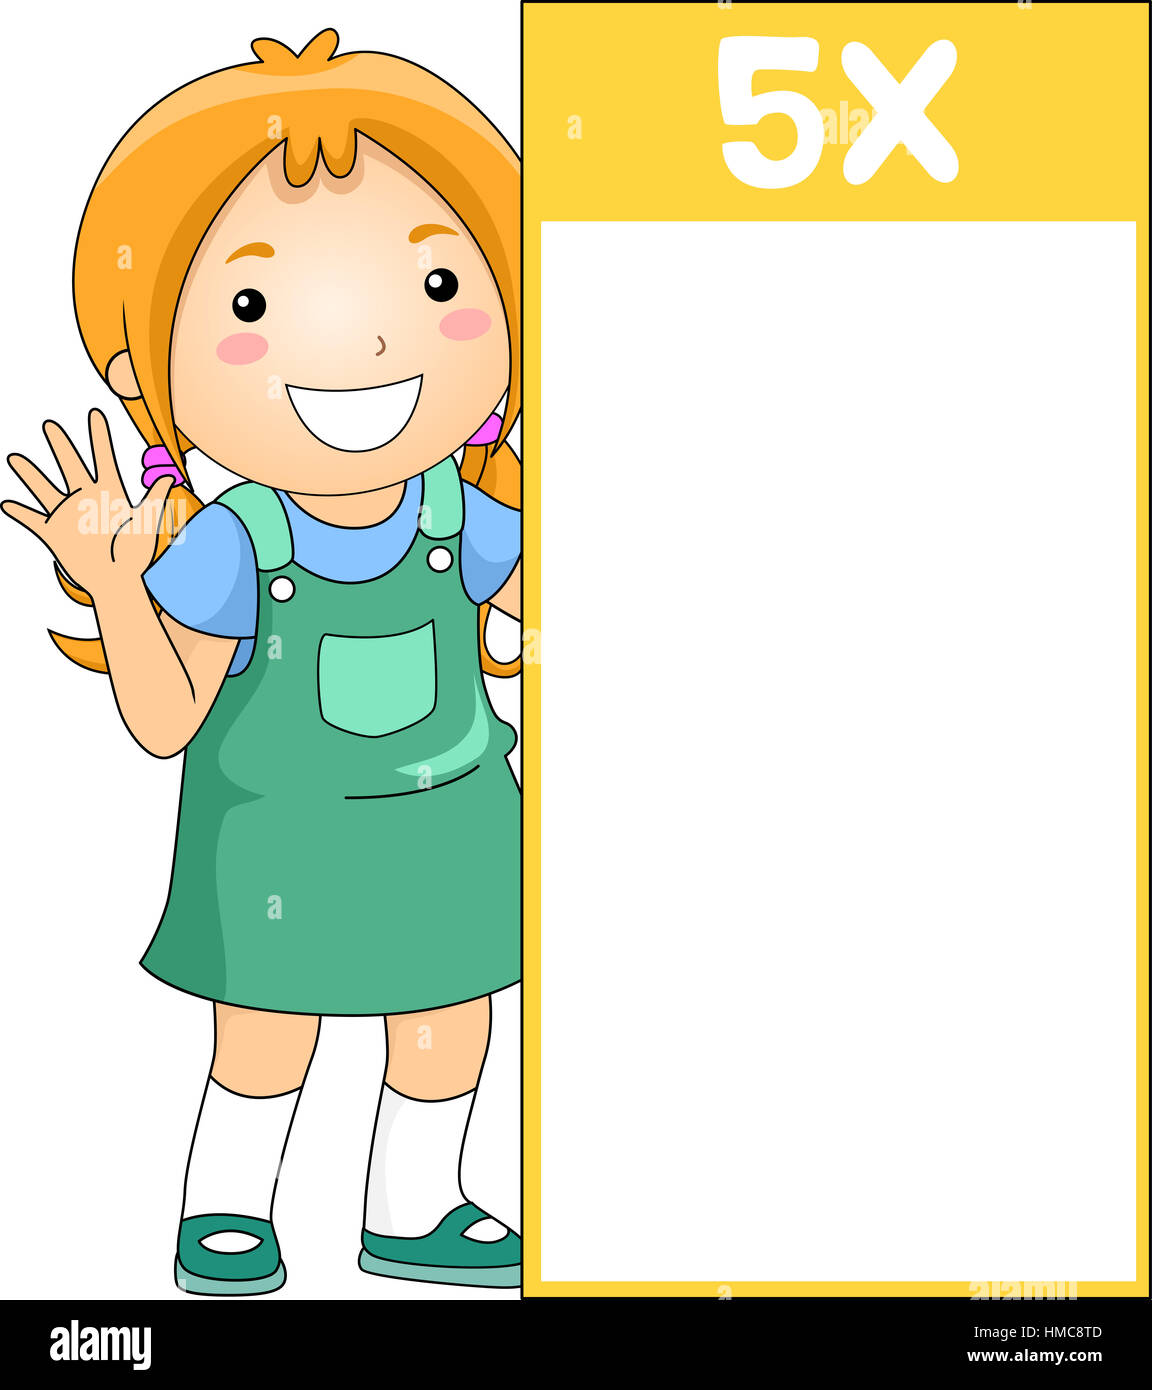 Illustration of a Multiplication Flash Card for Multiples of Five Stock Photo